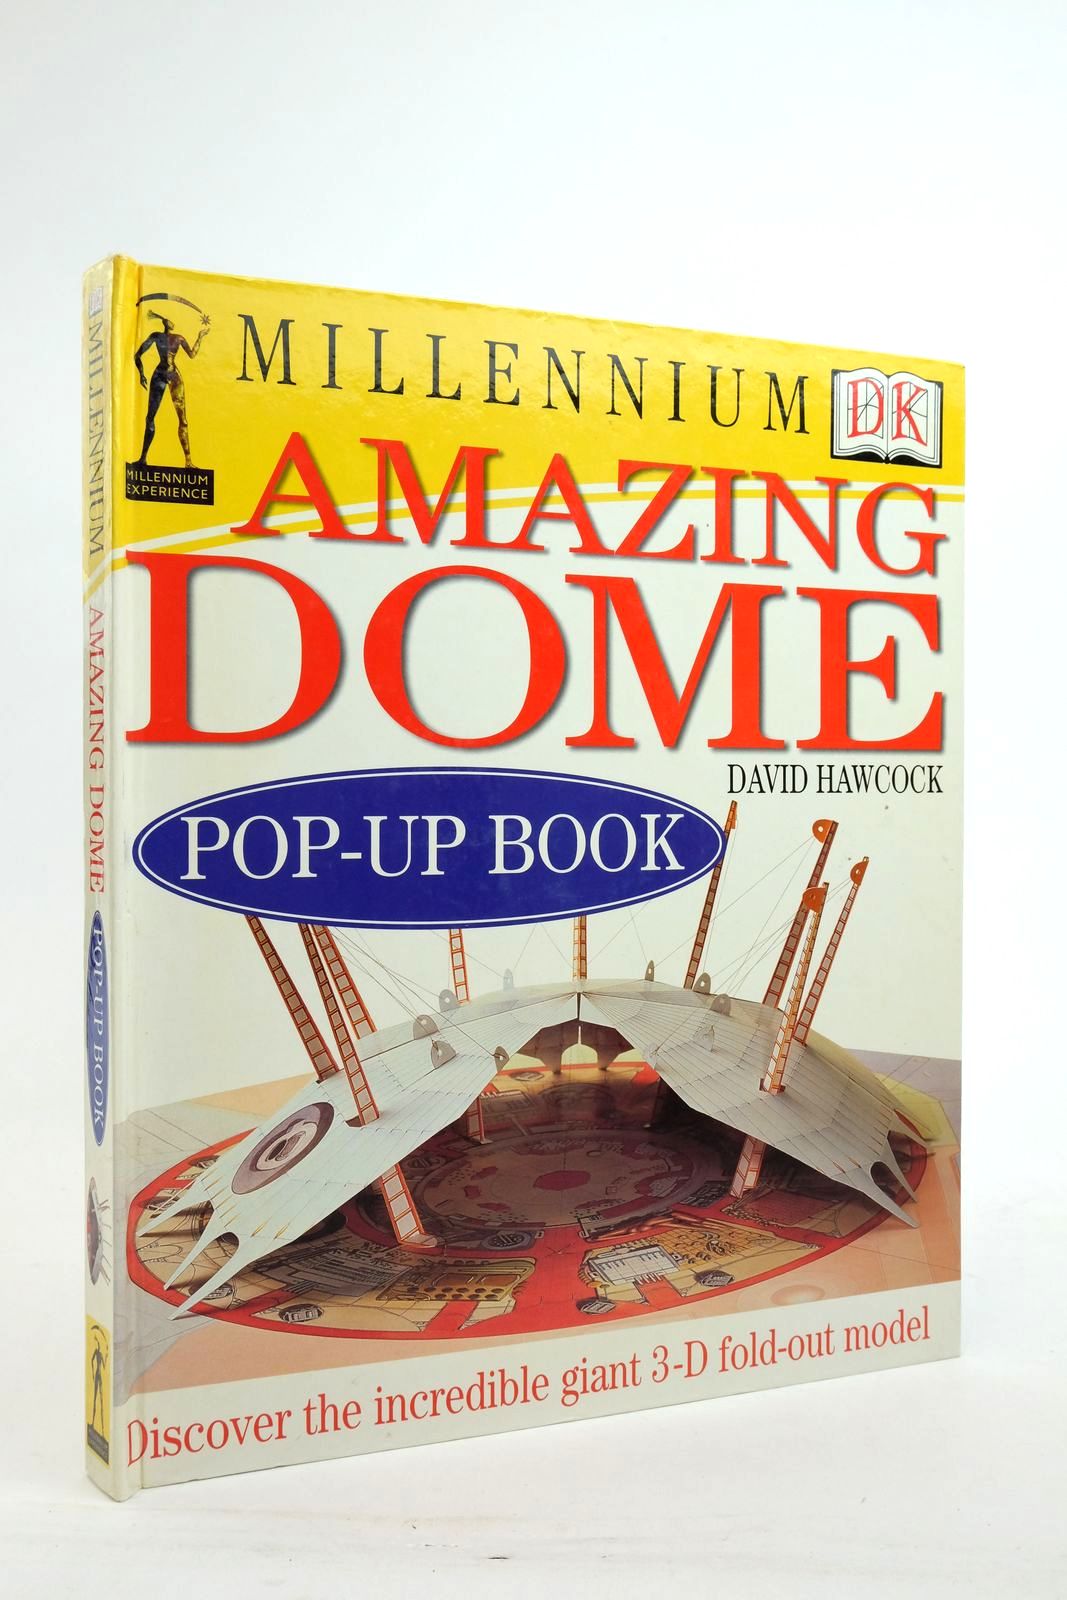 Photo of AMAZING DOME POP-UP BOOK written by Hawcock, David illustrated by Chasemore, Richard published by Dorling Kindersley (STOCK CODE: 2137352)  for sale by Stella & Rose's Books